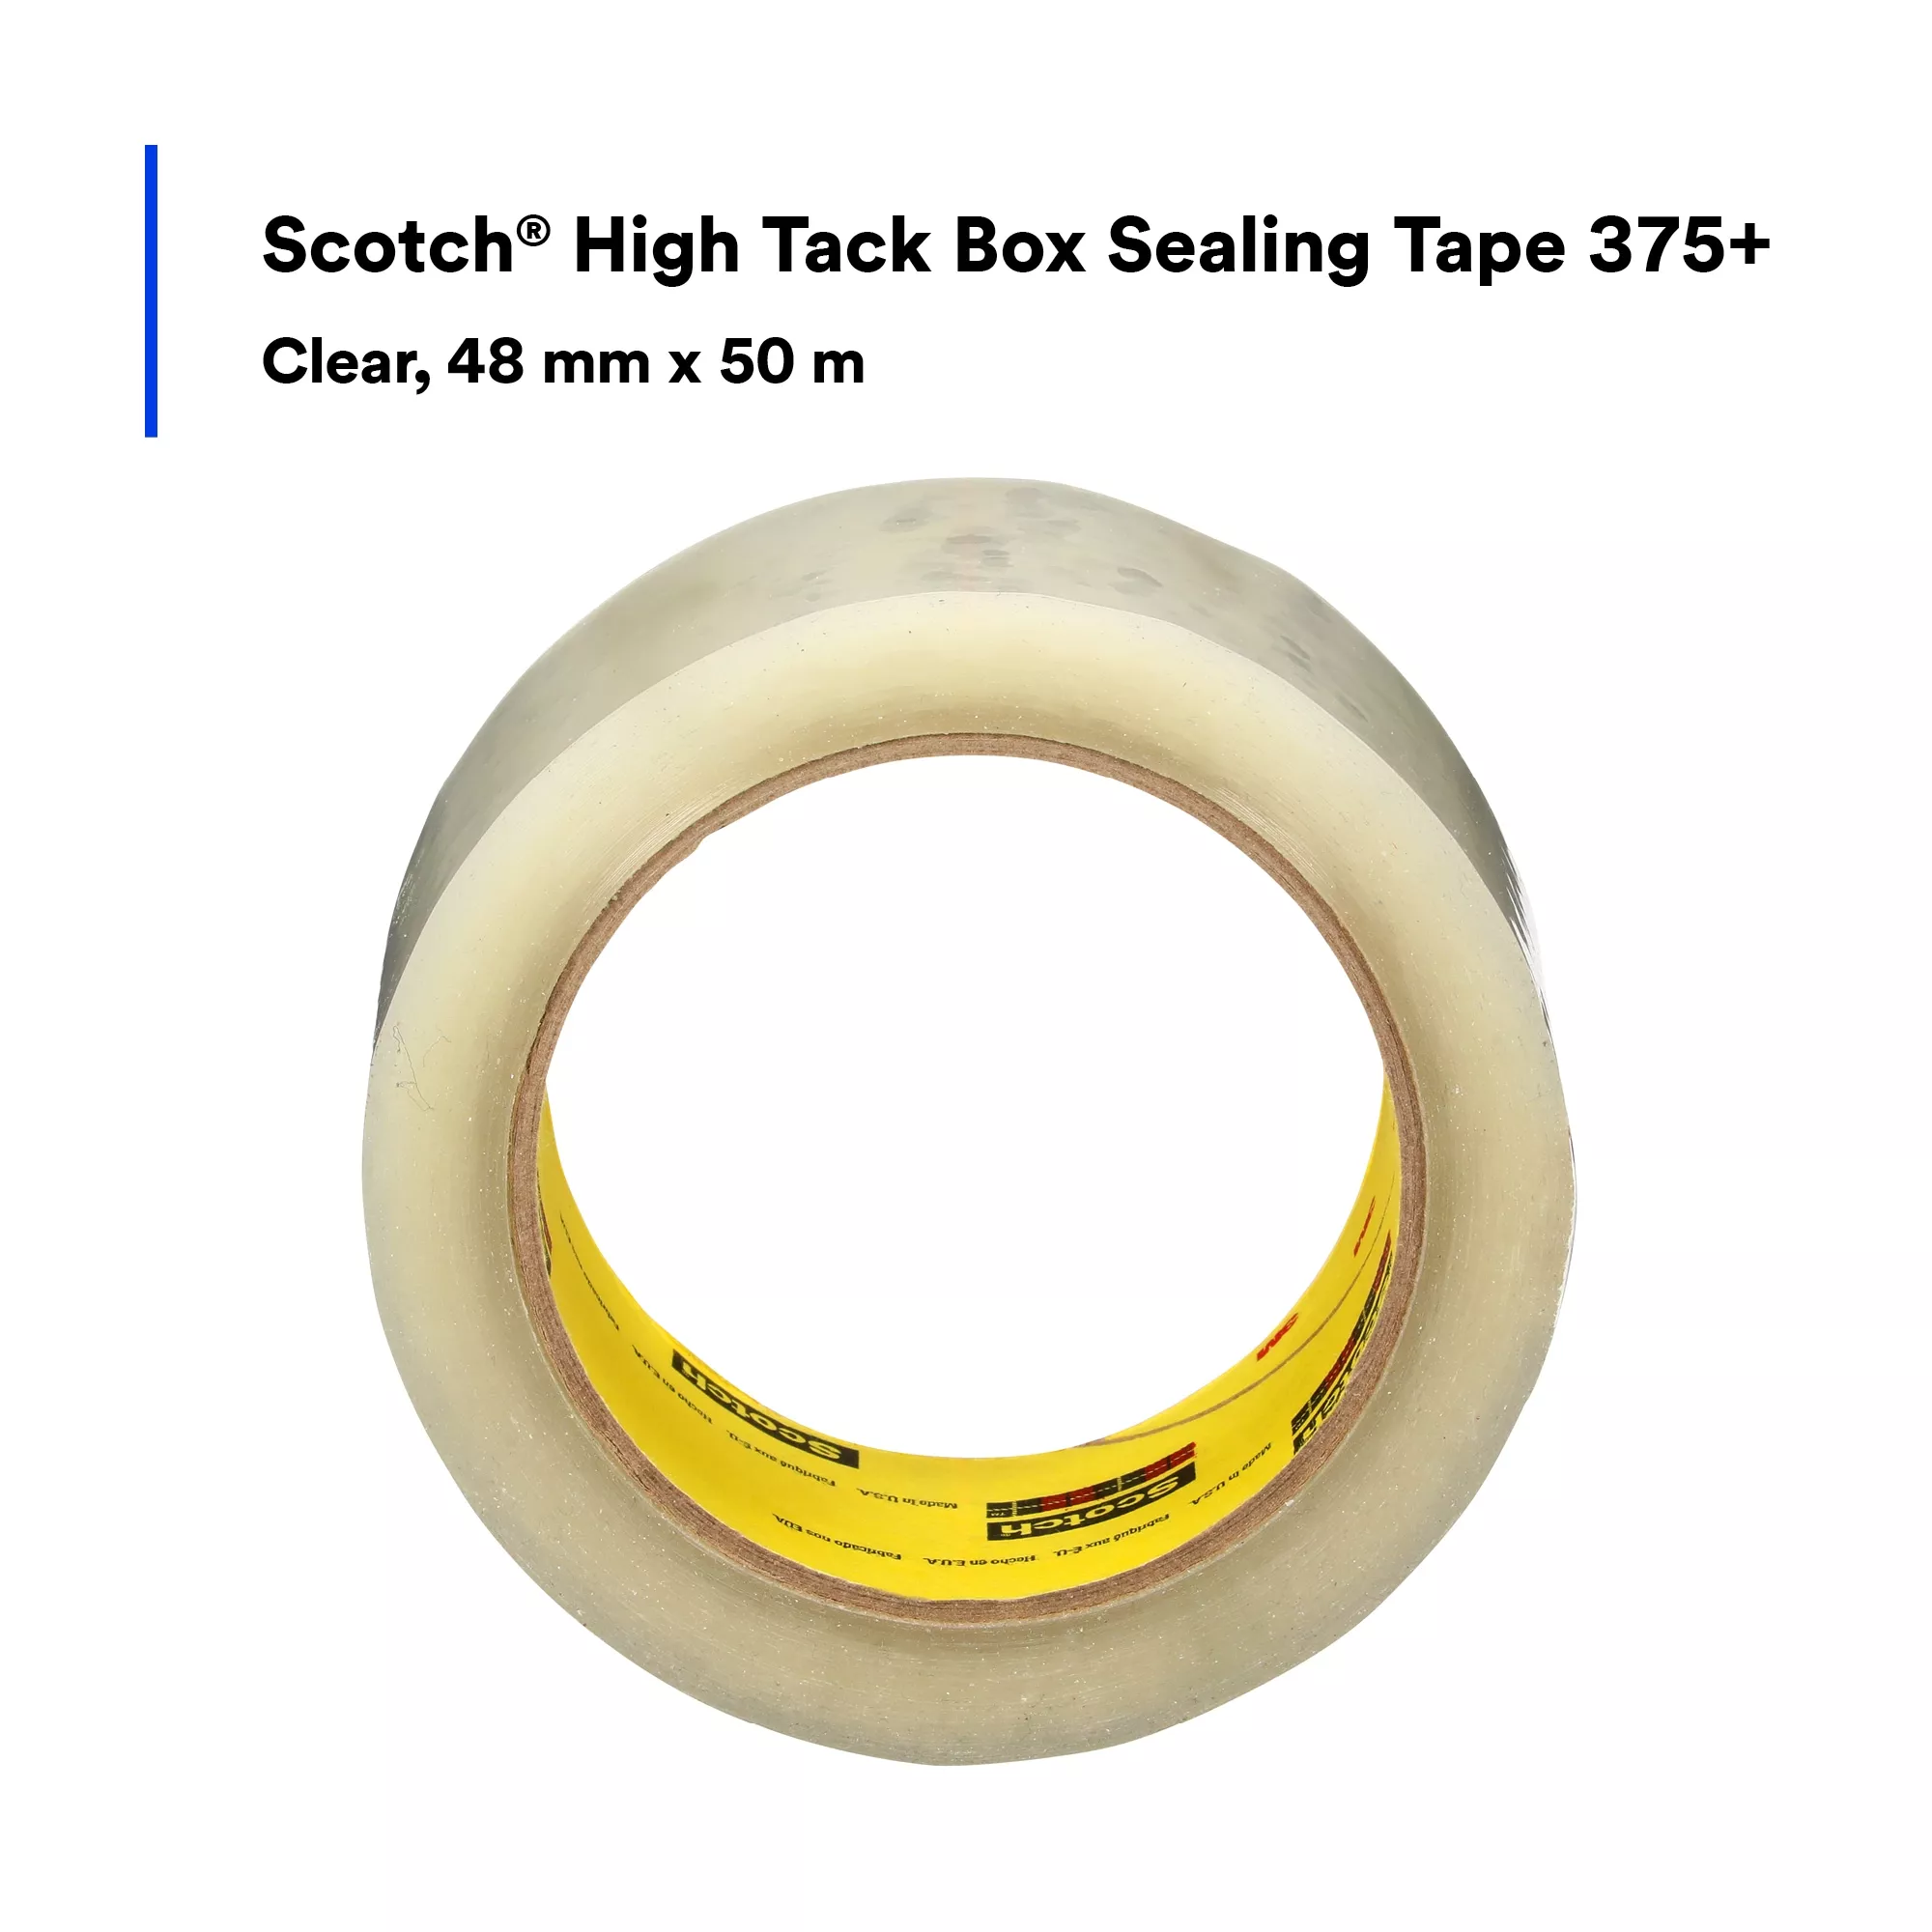 Product Number 375+ | Scotch® High Tack Box Sealing Tape 375+